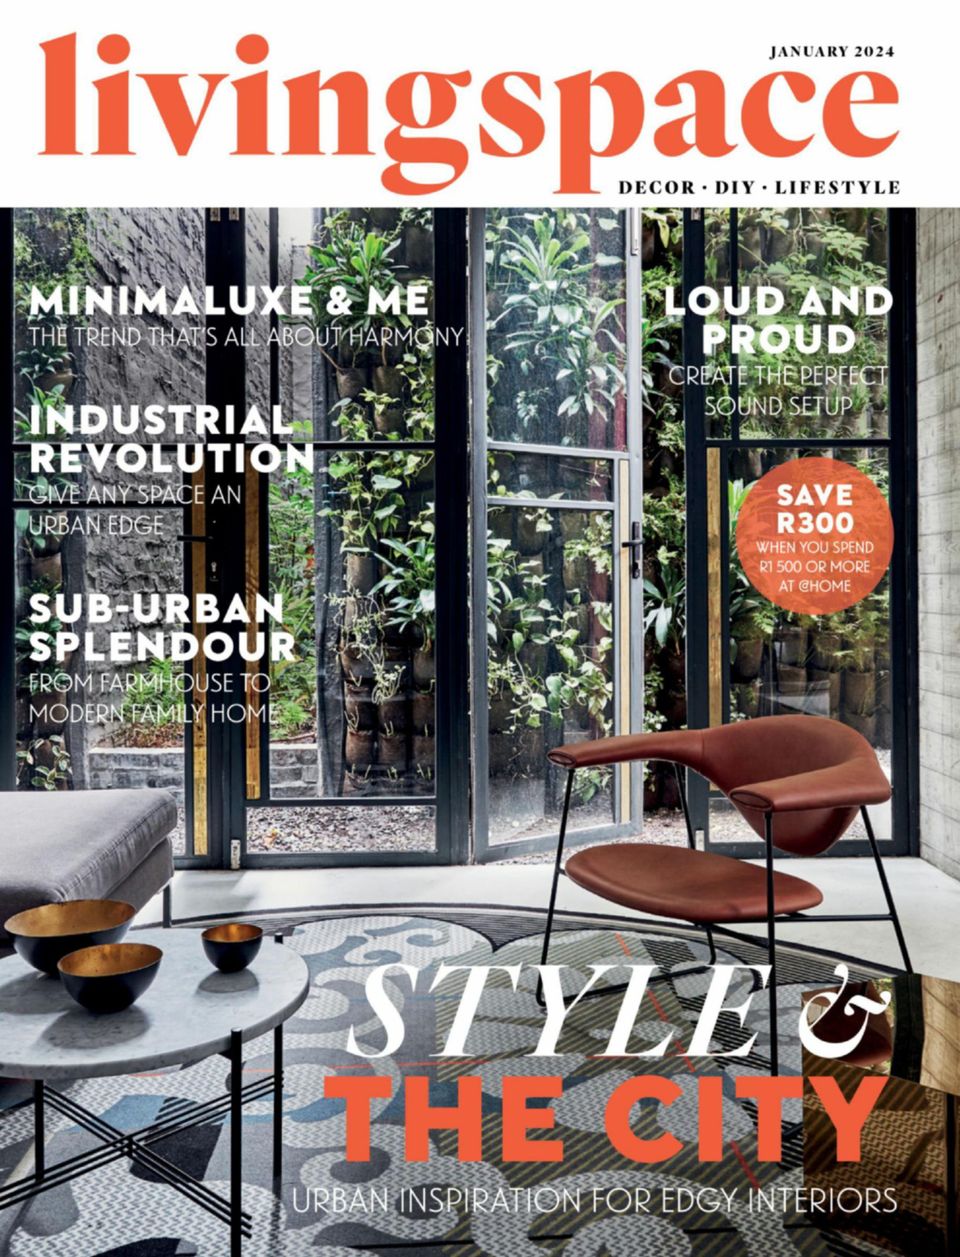 1300112 Living Space Cover January 2024 Issue 